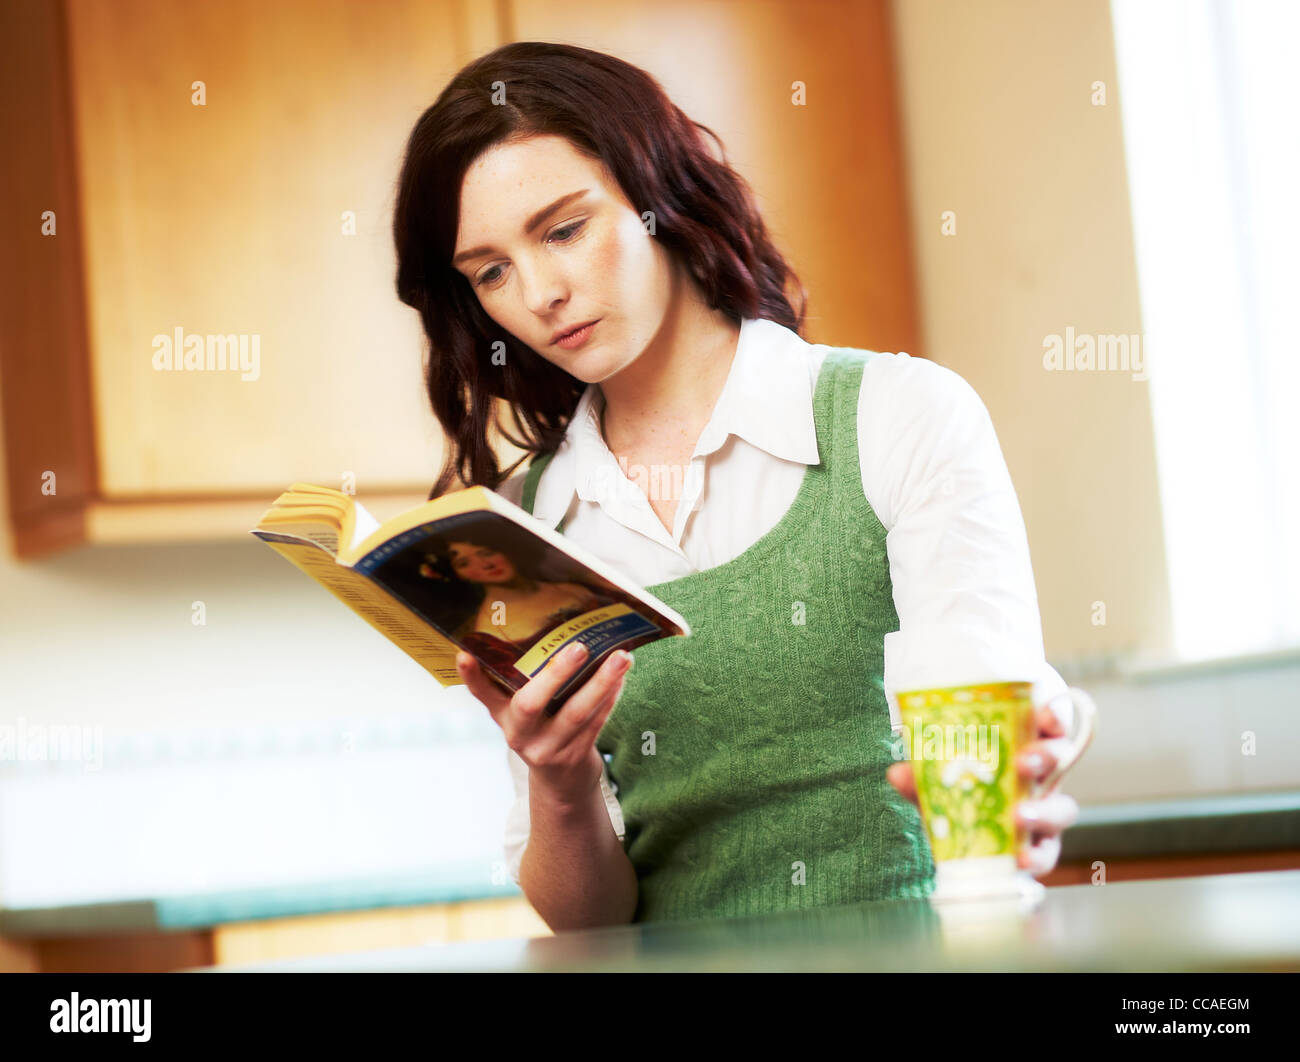 Woman sat reading a book Stock Photo